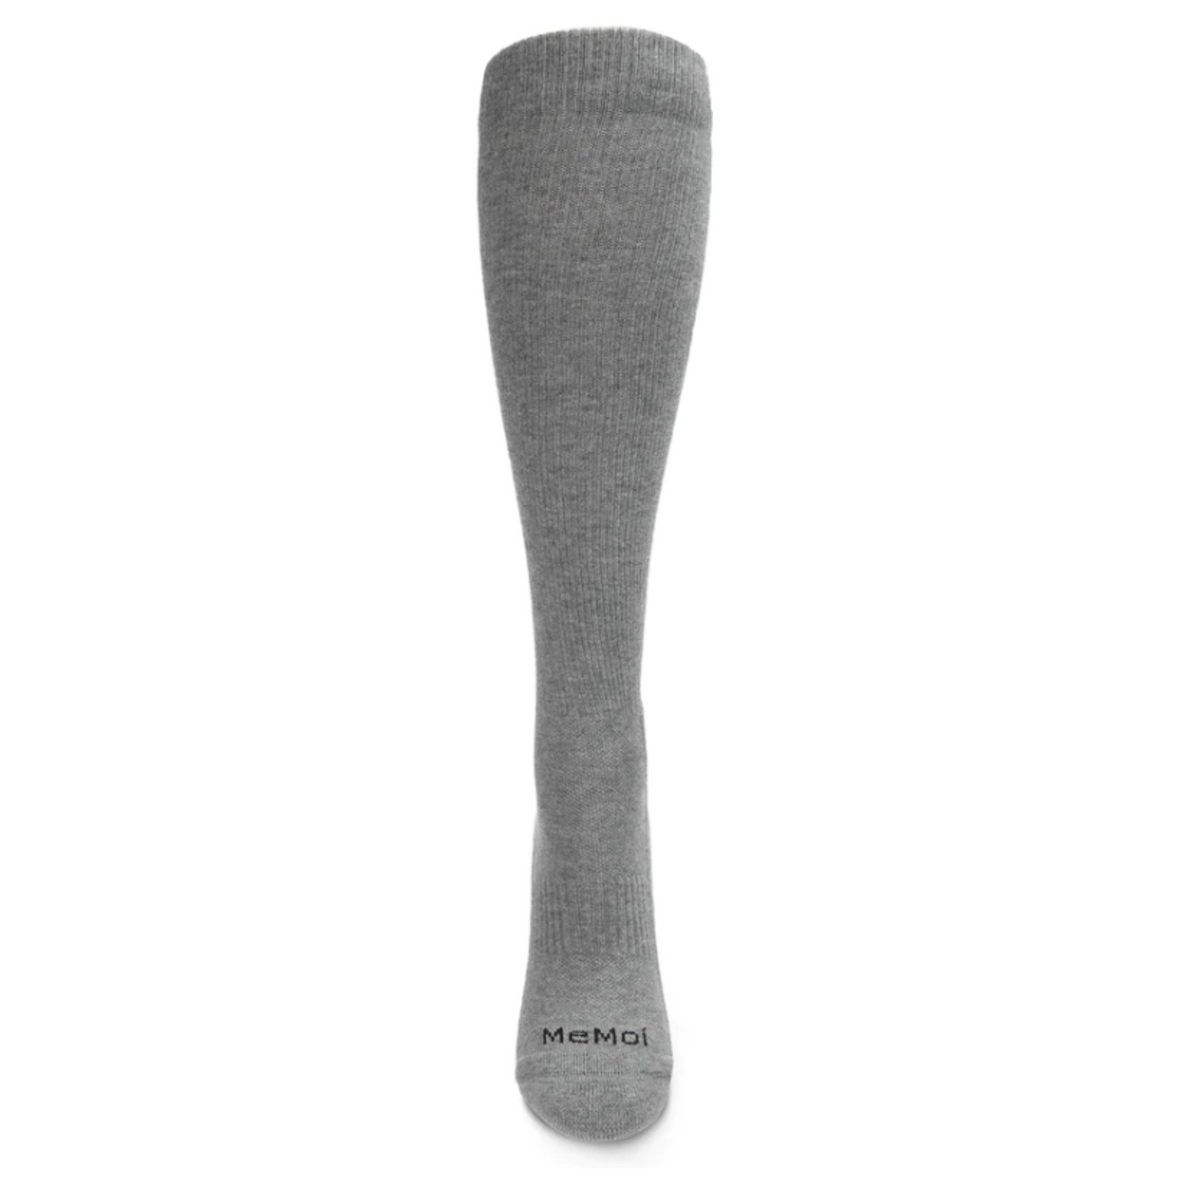 MeMoi Classic Athletic Cushion Sole Cotton Moderate Graduated Compression in gray from front